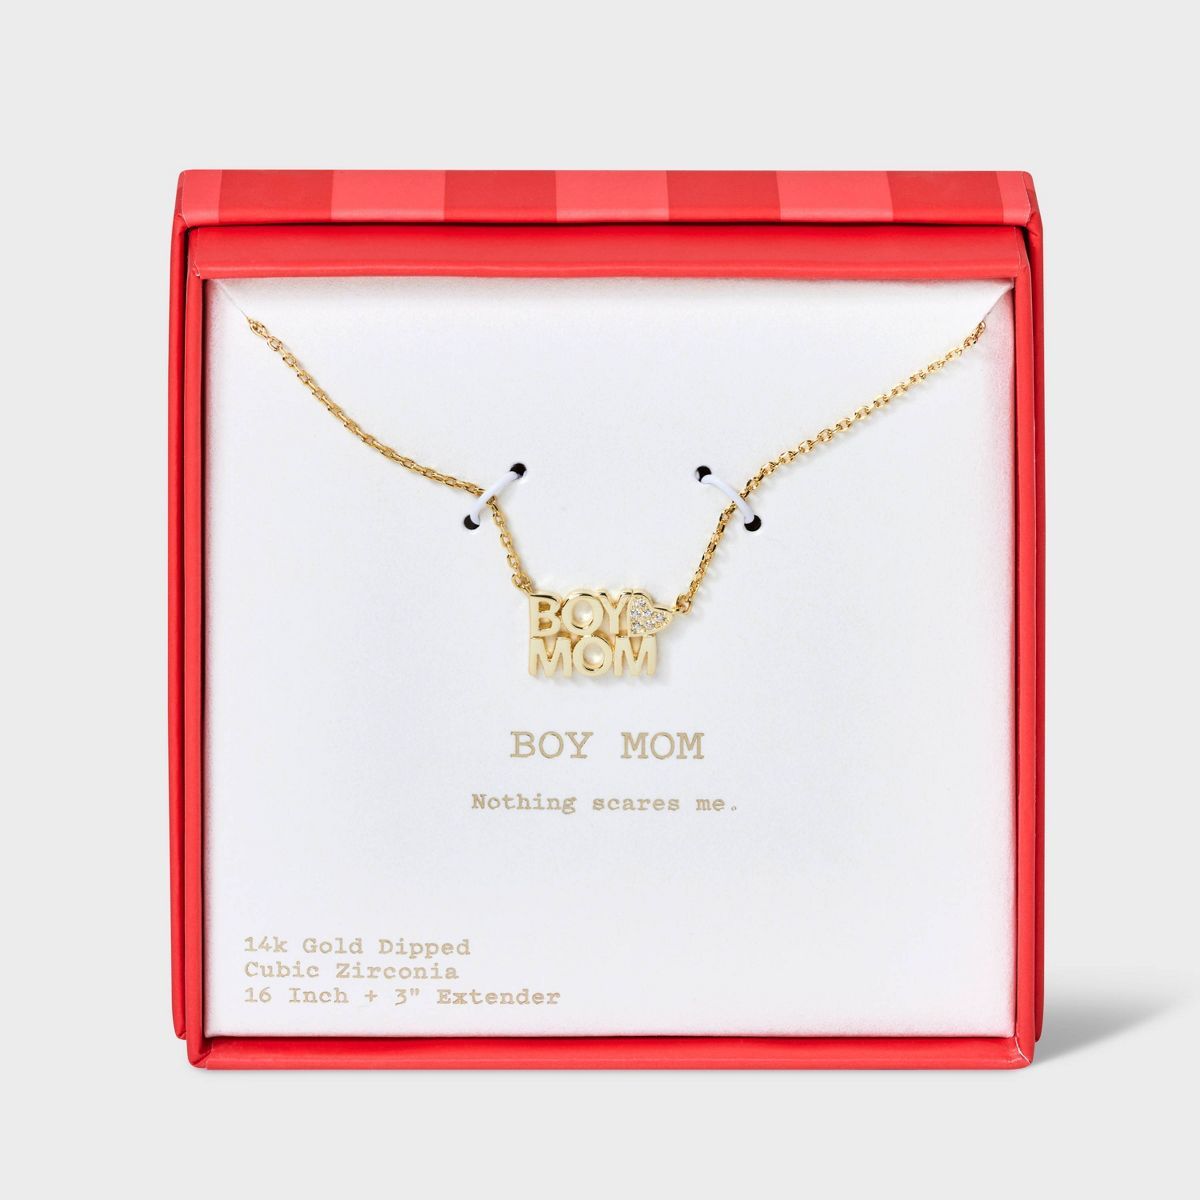 14k Gold Dipped "Boy Mom" Cubic Zirconia Heart Pendant Necklace - A New Day™ Gold | Target